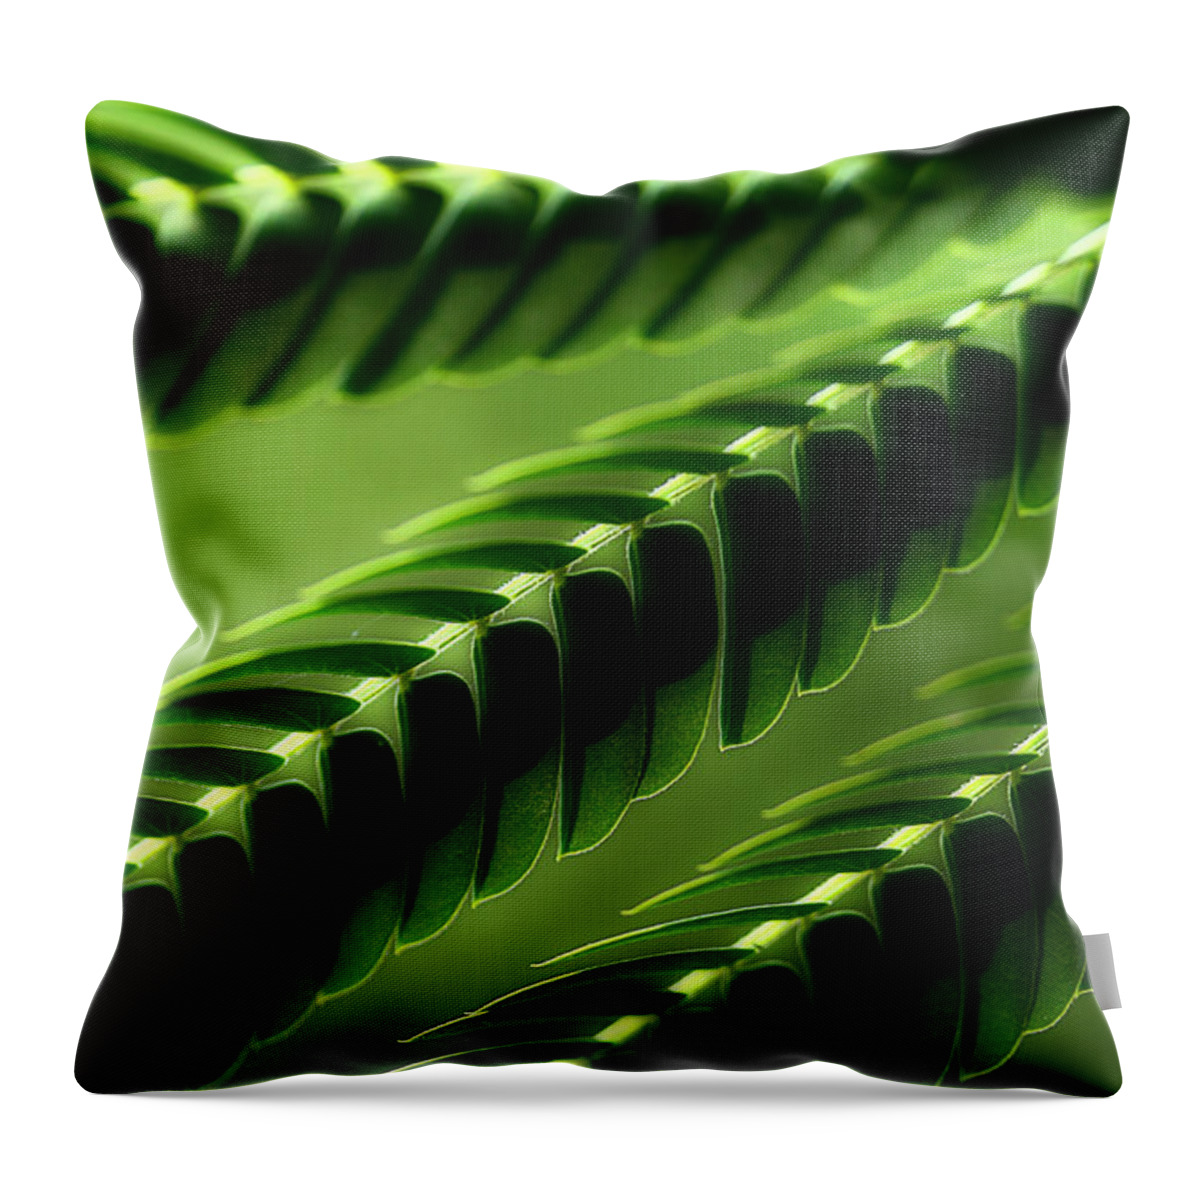 Mimosa Tree Leaves Throw Pillow featuring the photograph Mimosa Tree Leaf Abstract by Michael Eingle